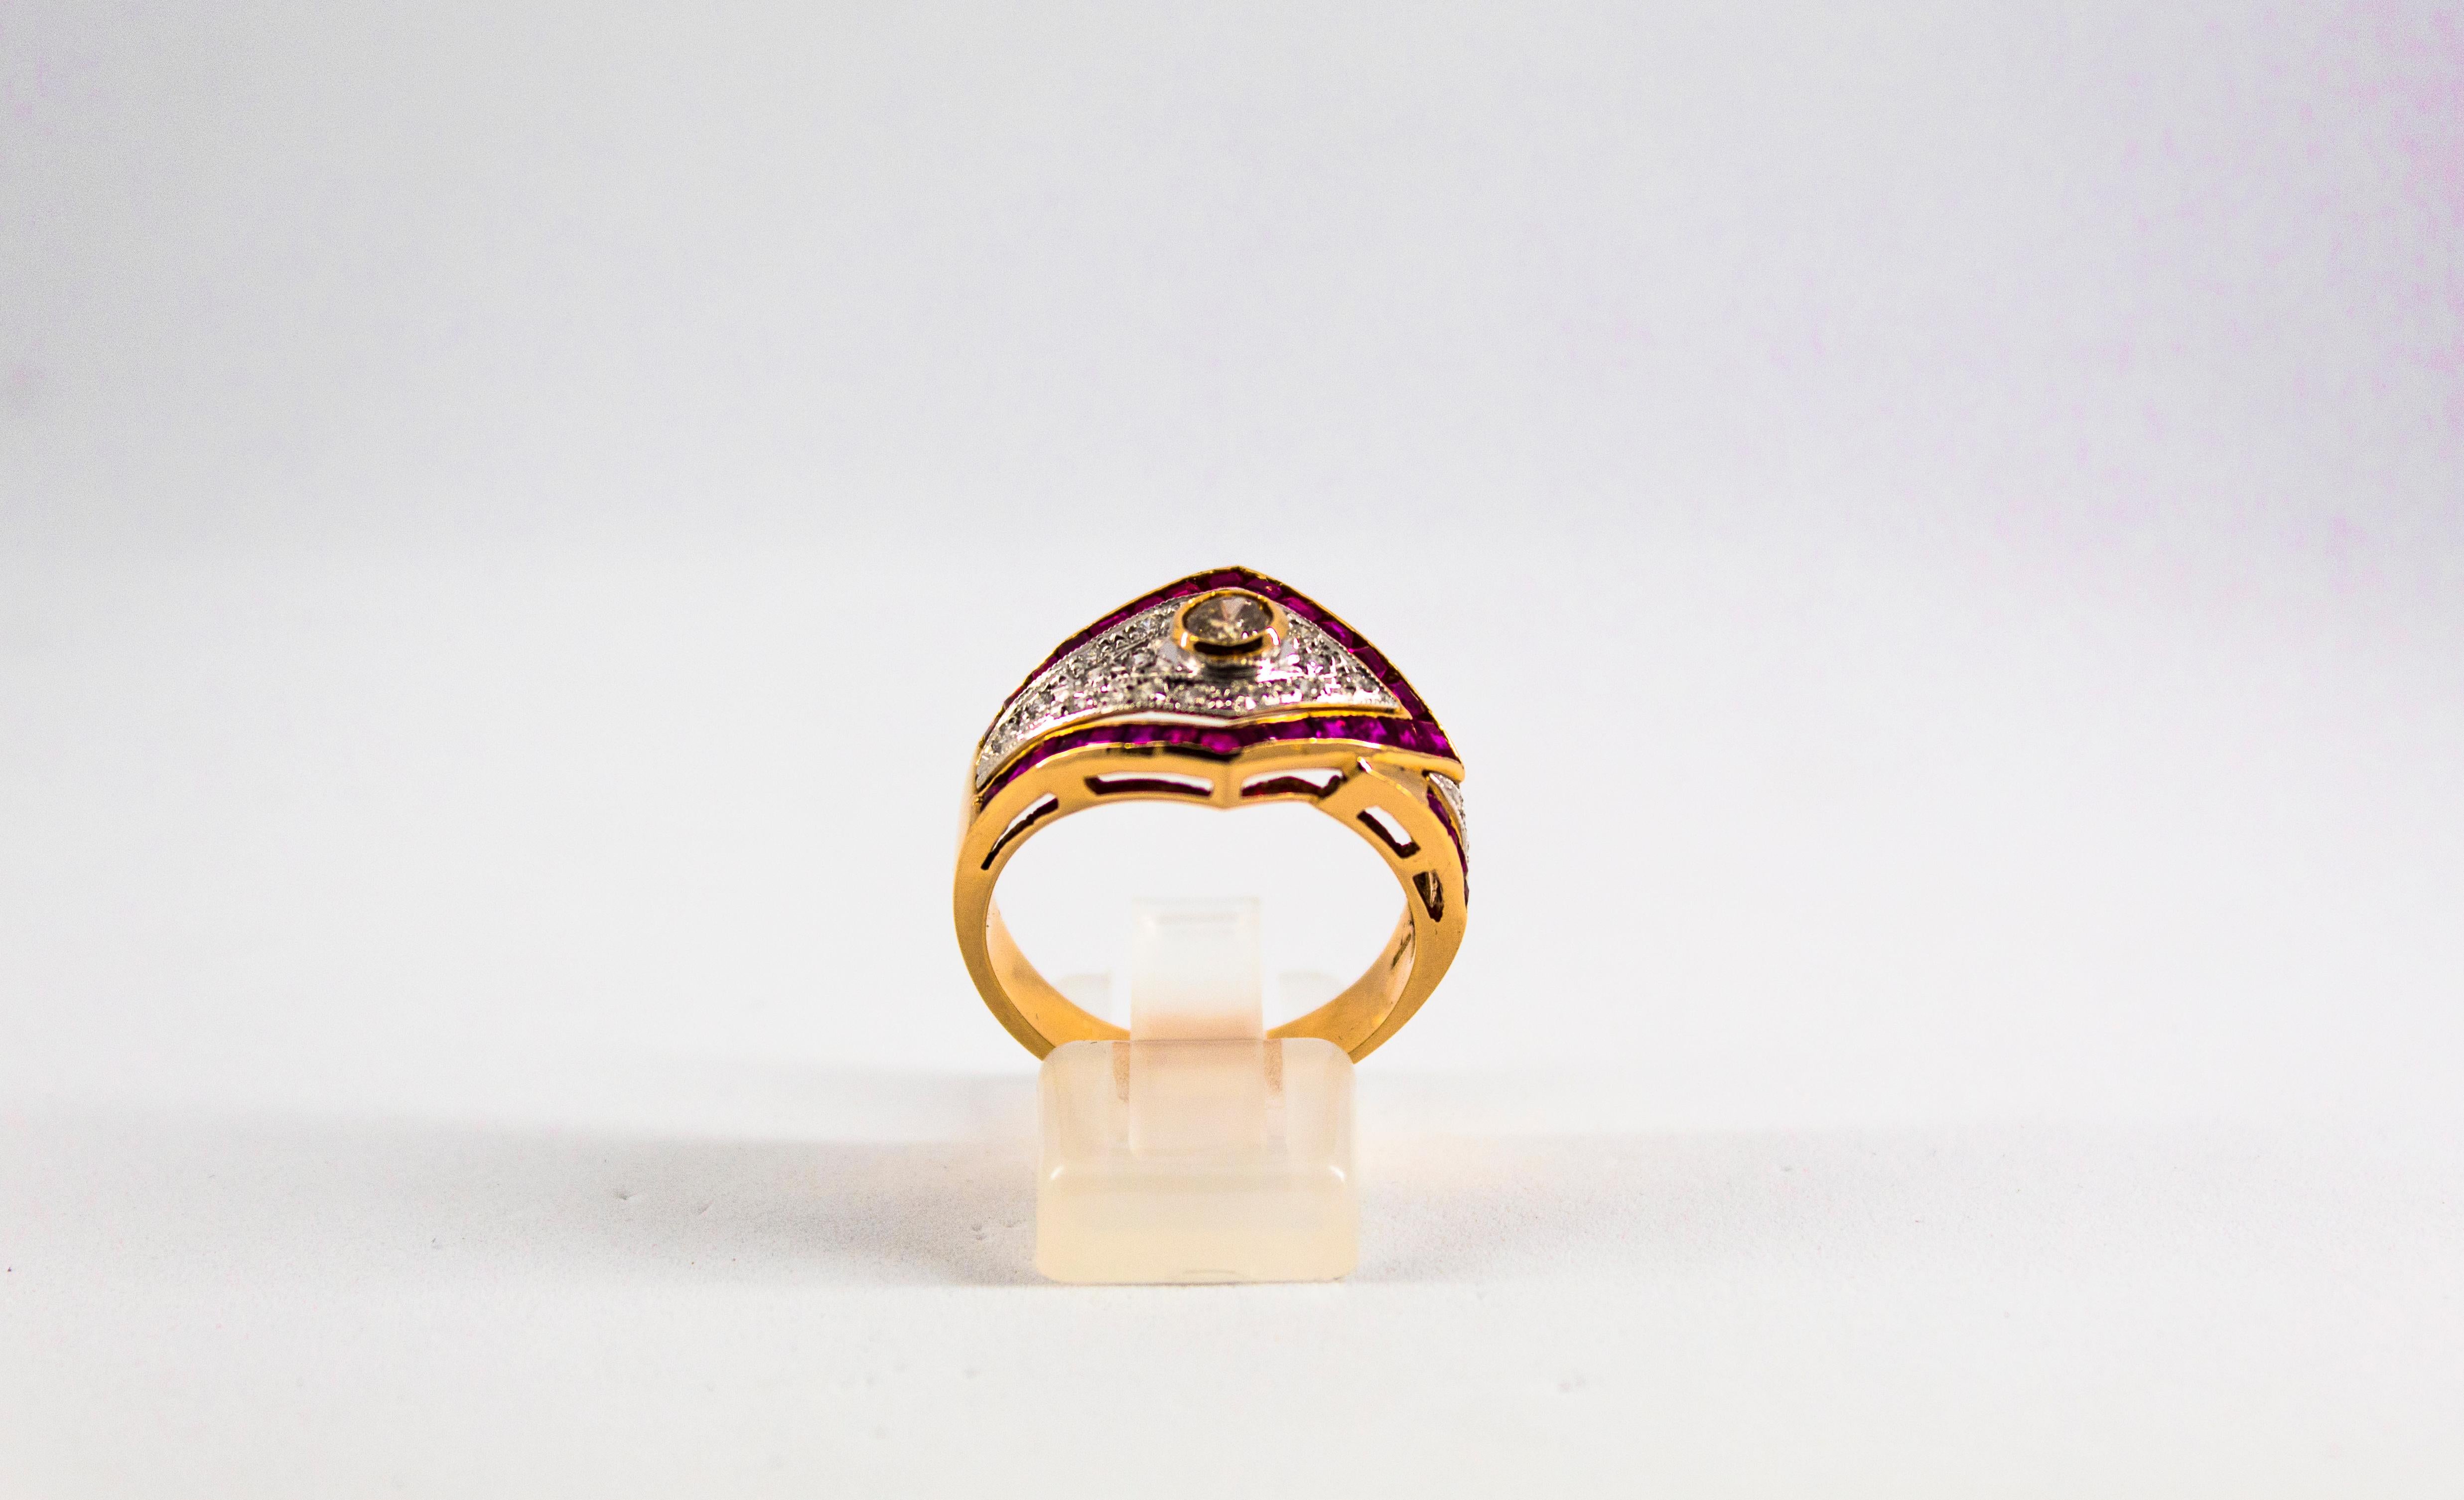 This Ring is made of 14K Yellow Gold.
This Ring has 0.60 Carats of White Diamonds.
This Ring has 1.53 Carats of Rubies.
Size ITA: 12 1/2 USA: 6 1/4
We're a workshop so every piece is handmade, customizable and resizable.